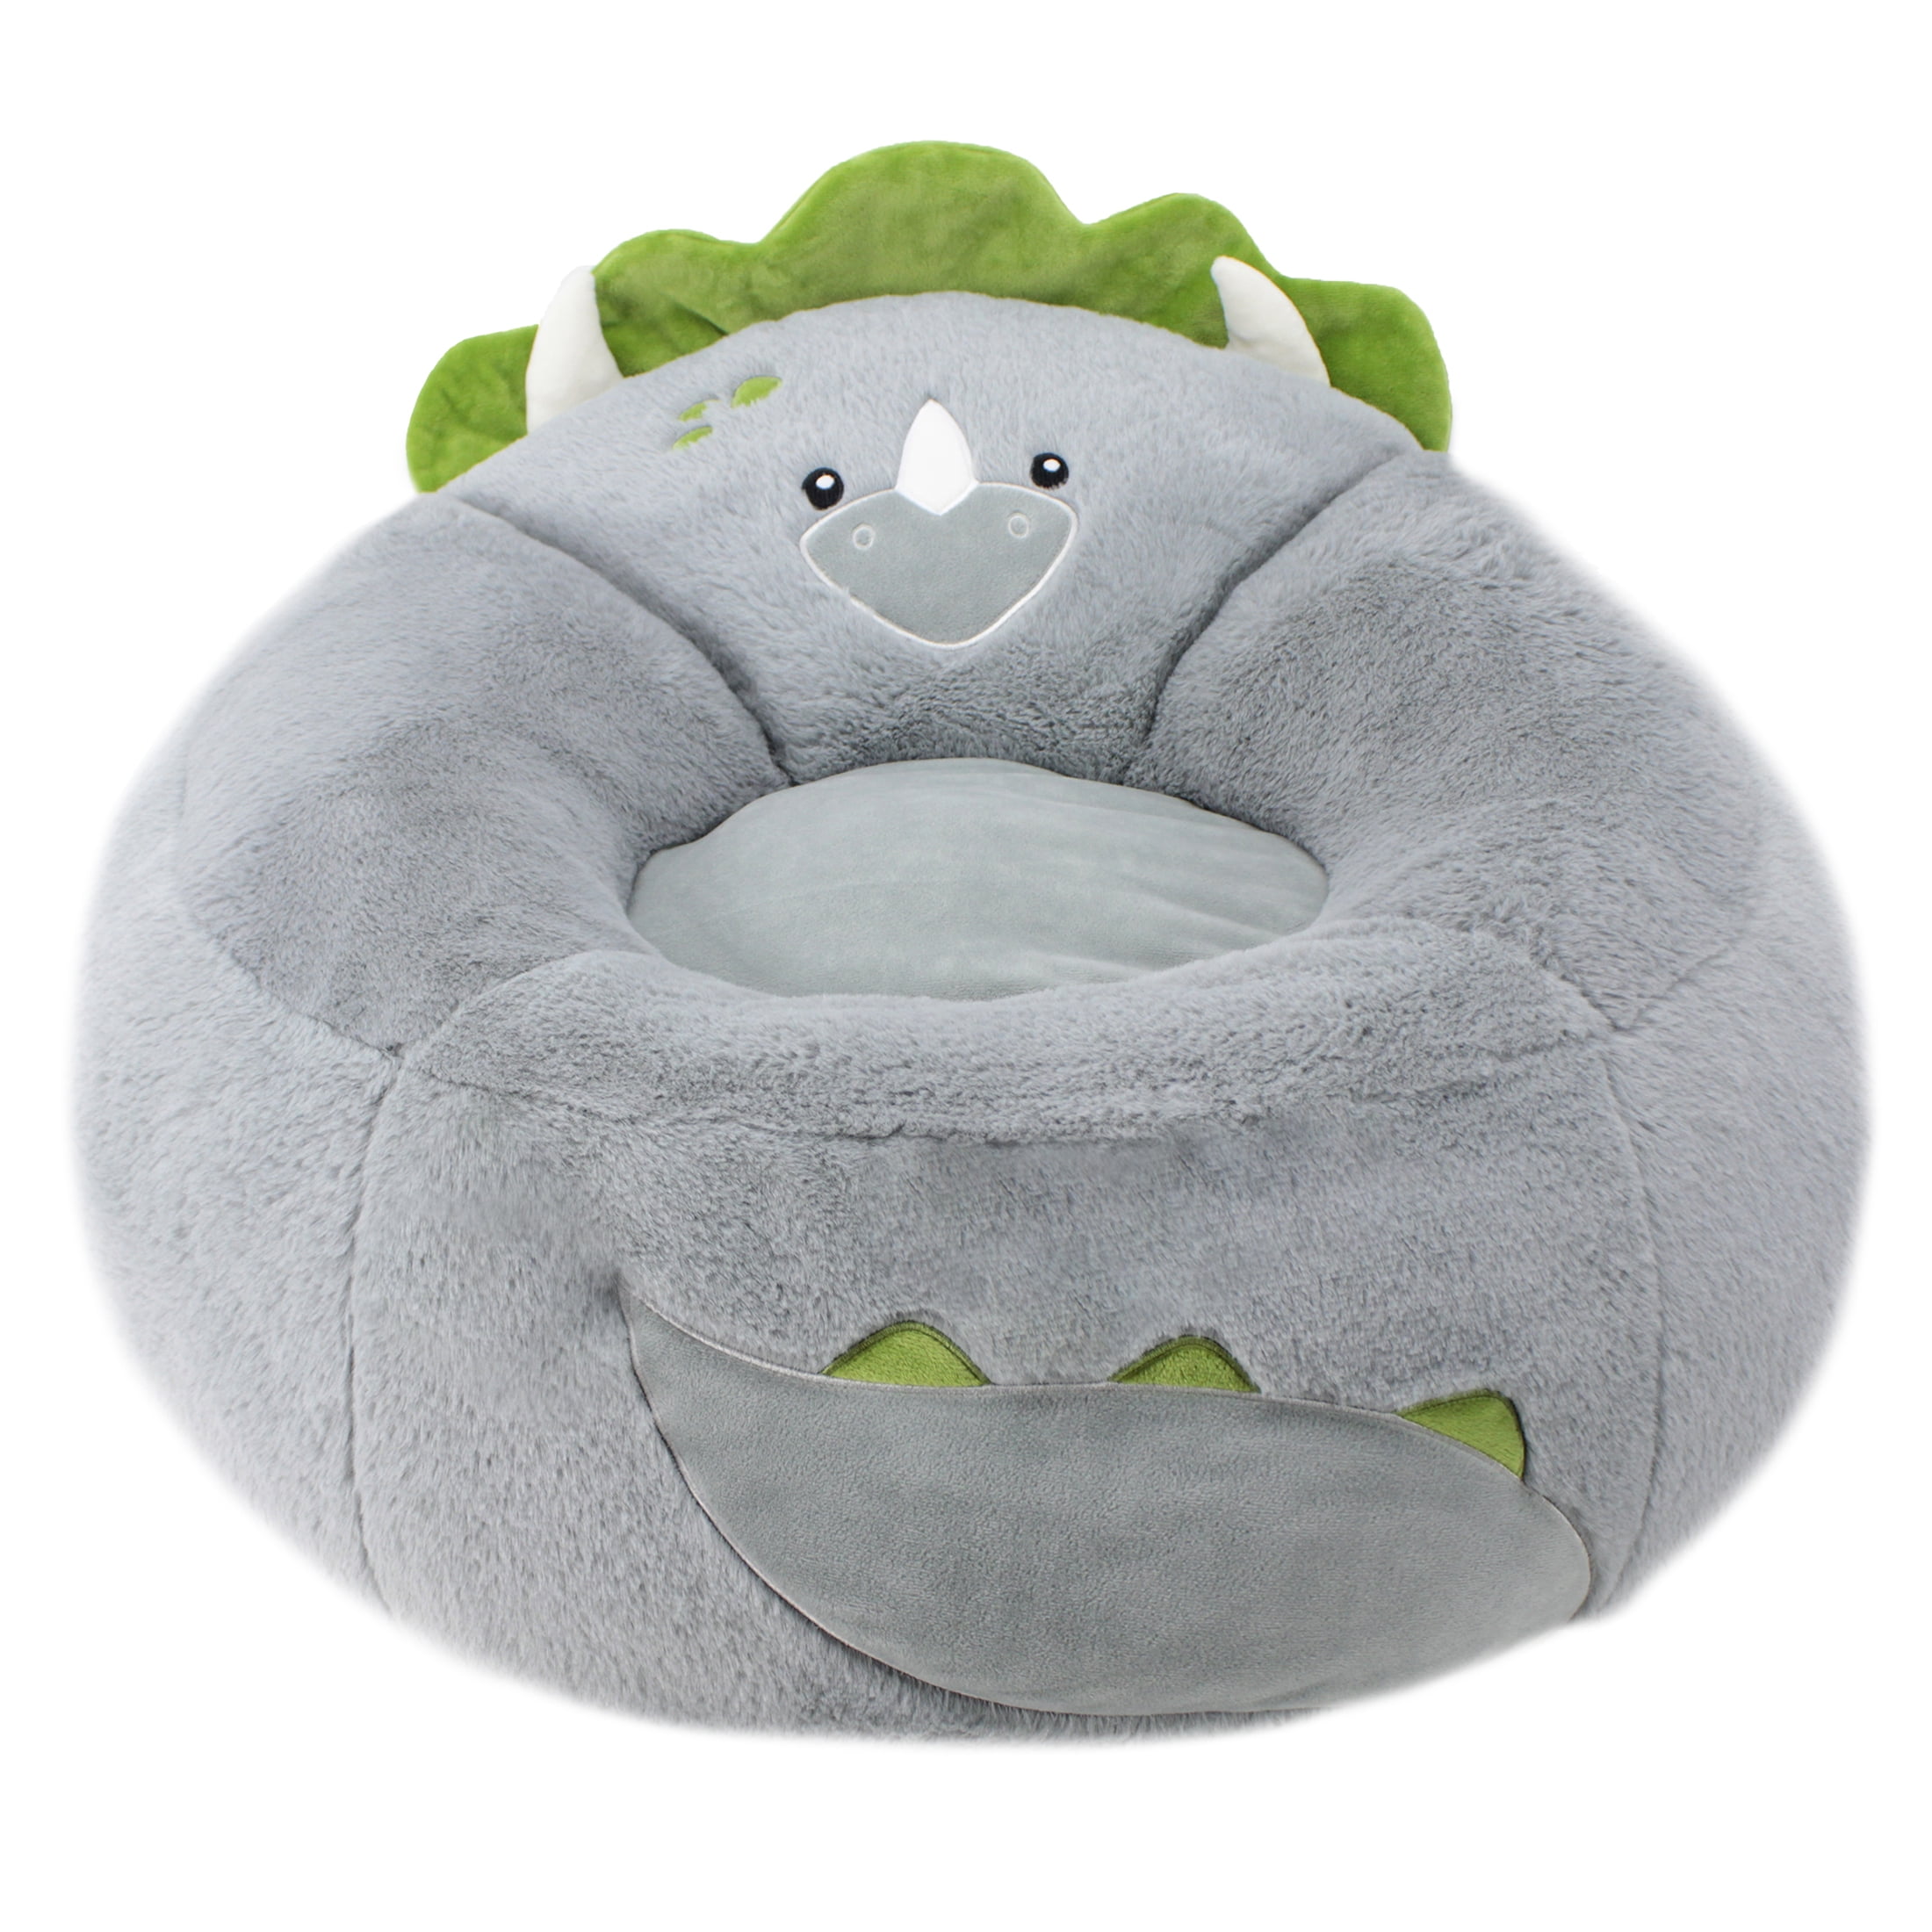 Baby Bean Bag Chair for Kids UNFILLED With 2 Covers & Harness White Grey Zig-Zag 